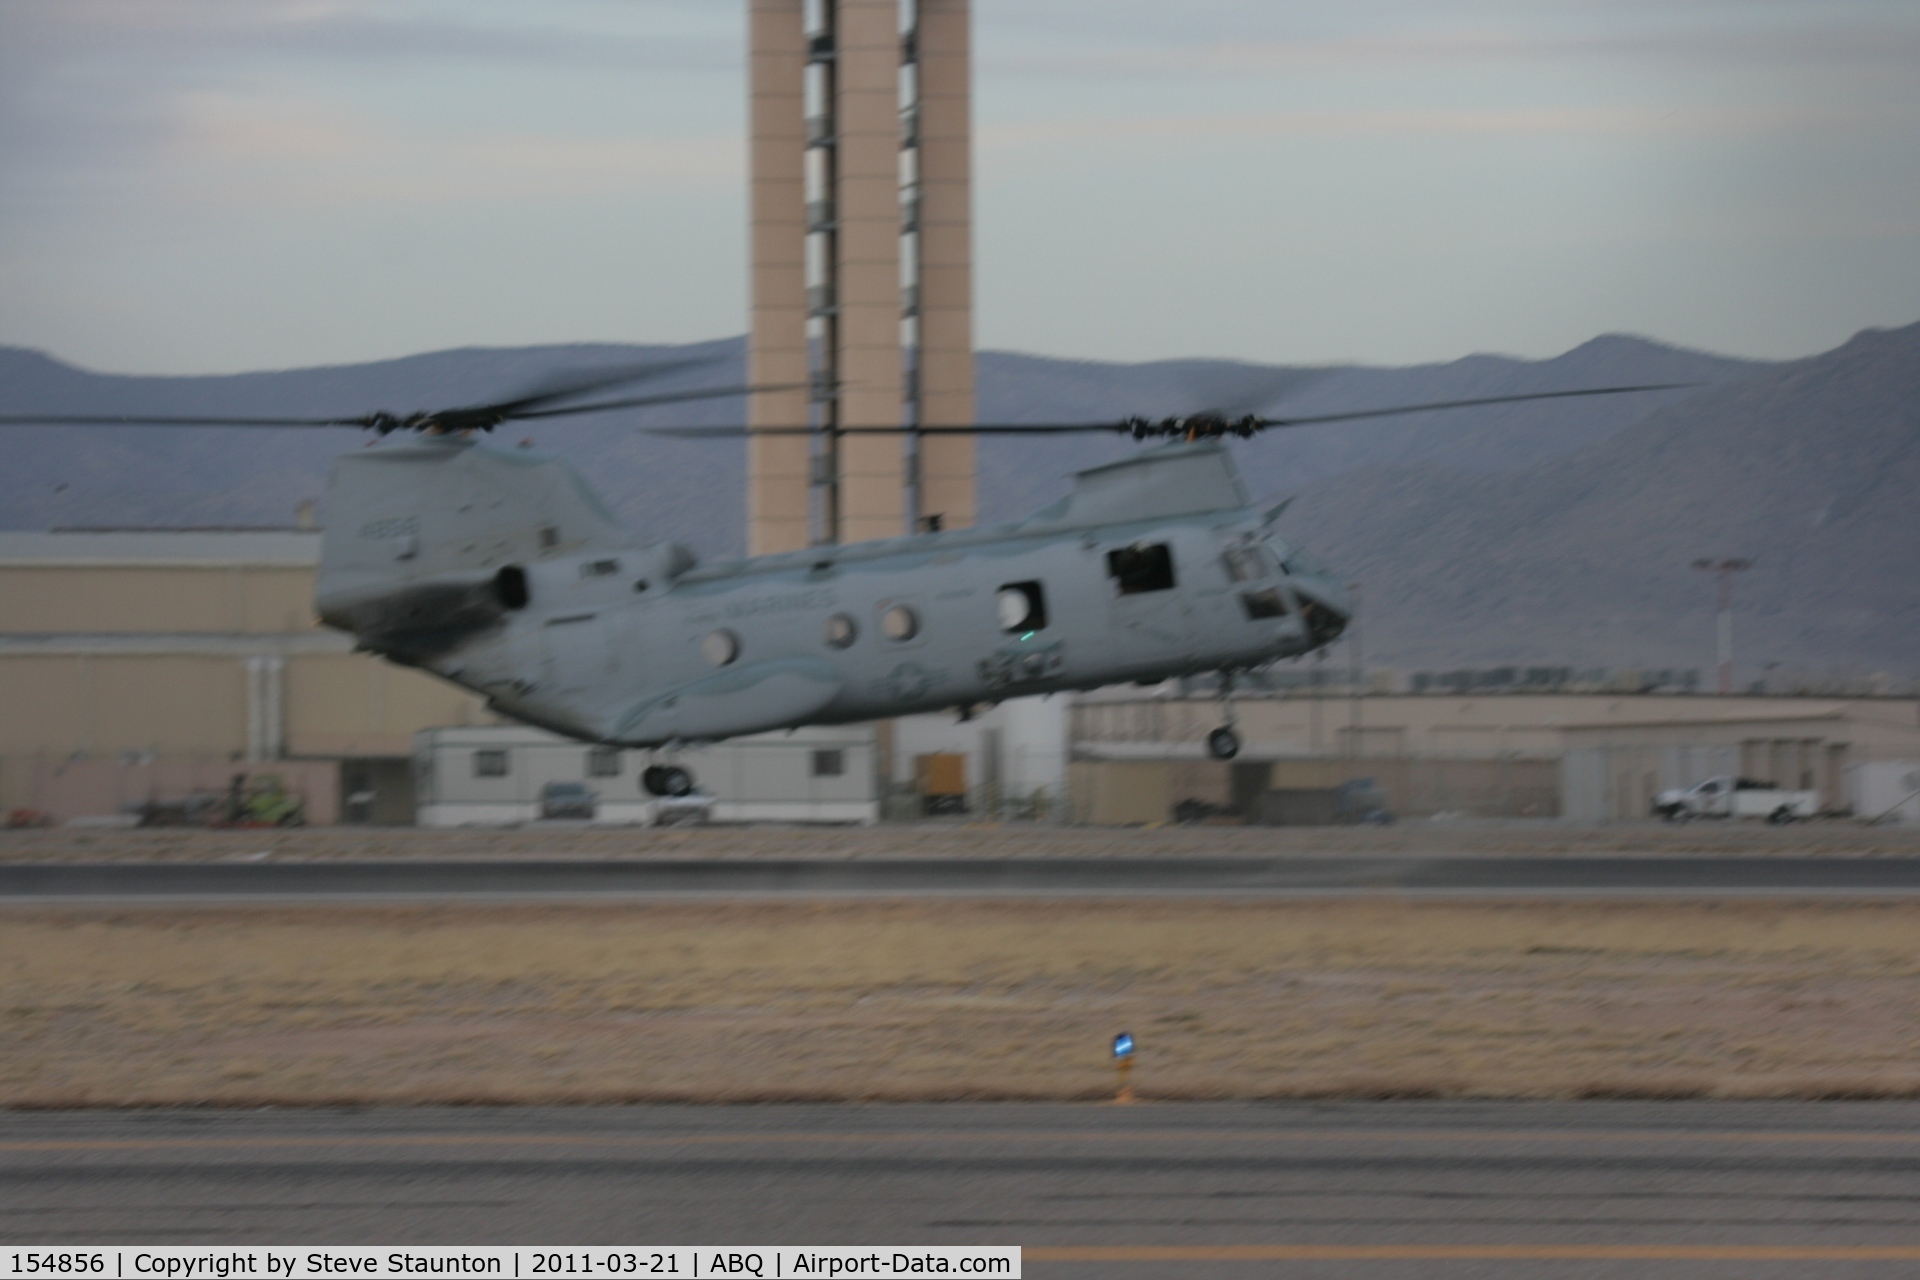 154856, Boeing Vertol CH-46F Sea Knight C/N 2463, Taken at Alburquerque International Sunport Airport, New Mexico in March 2011 whilst on an Aeroprint Aviation tour